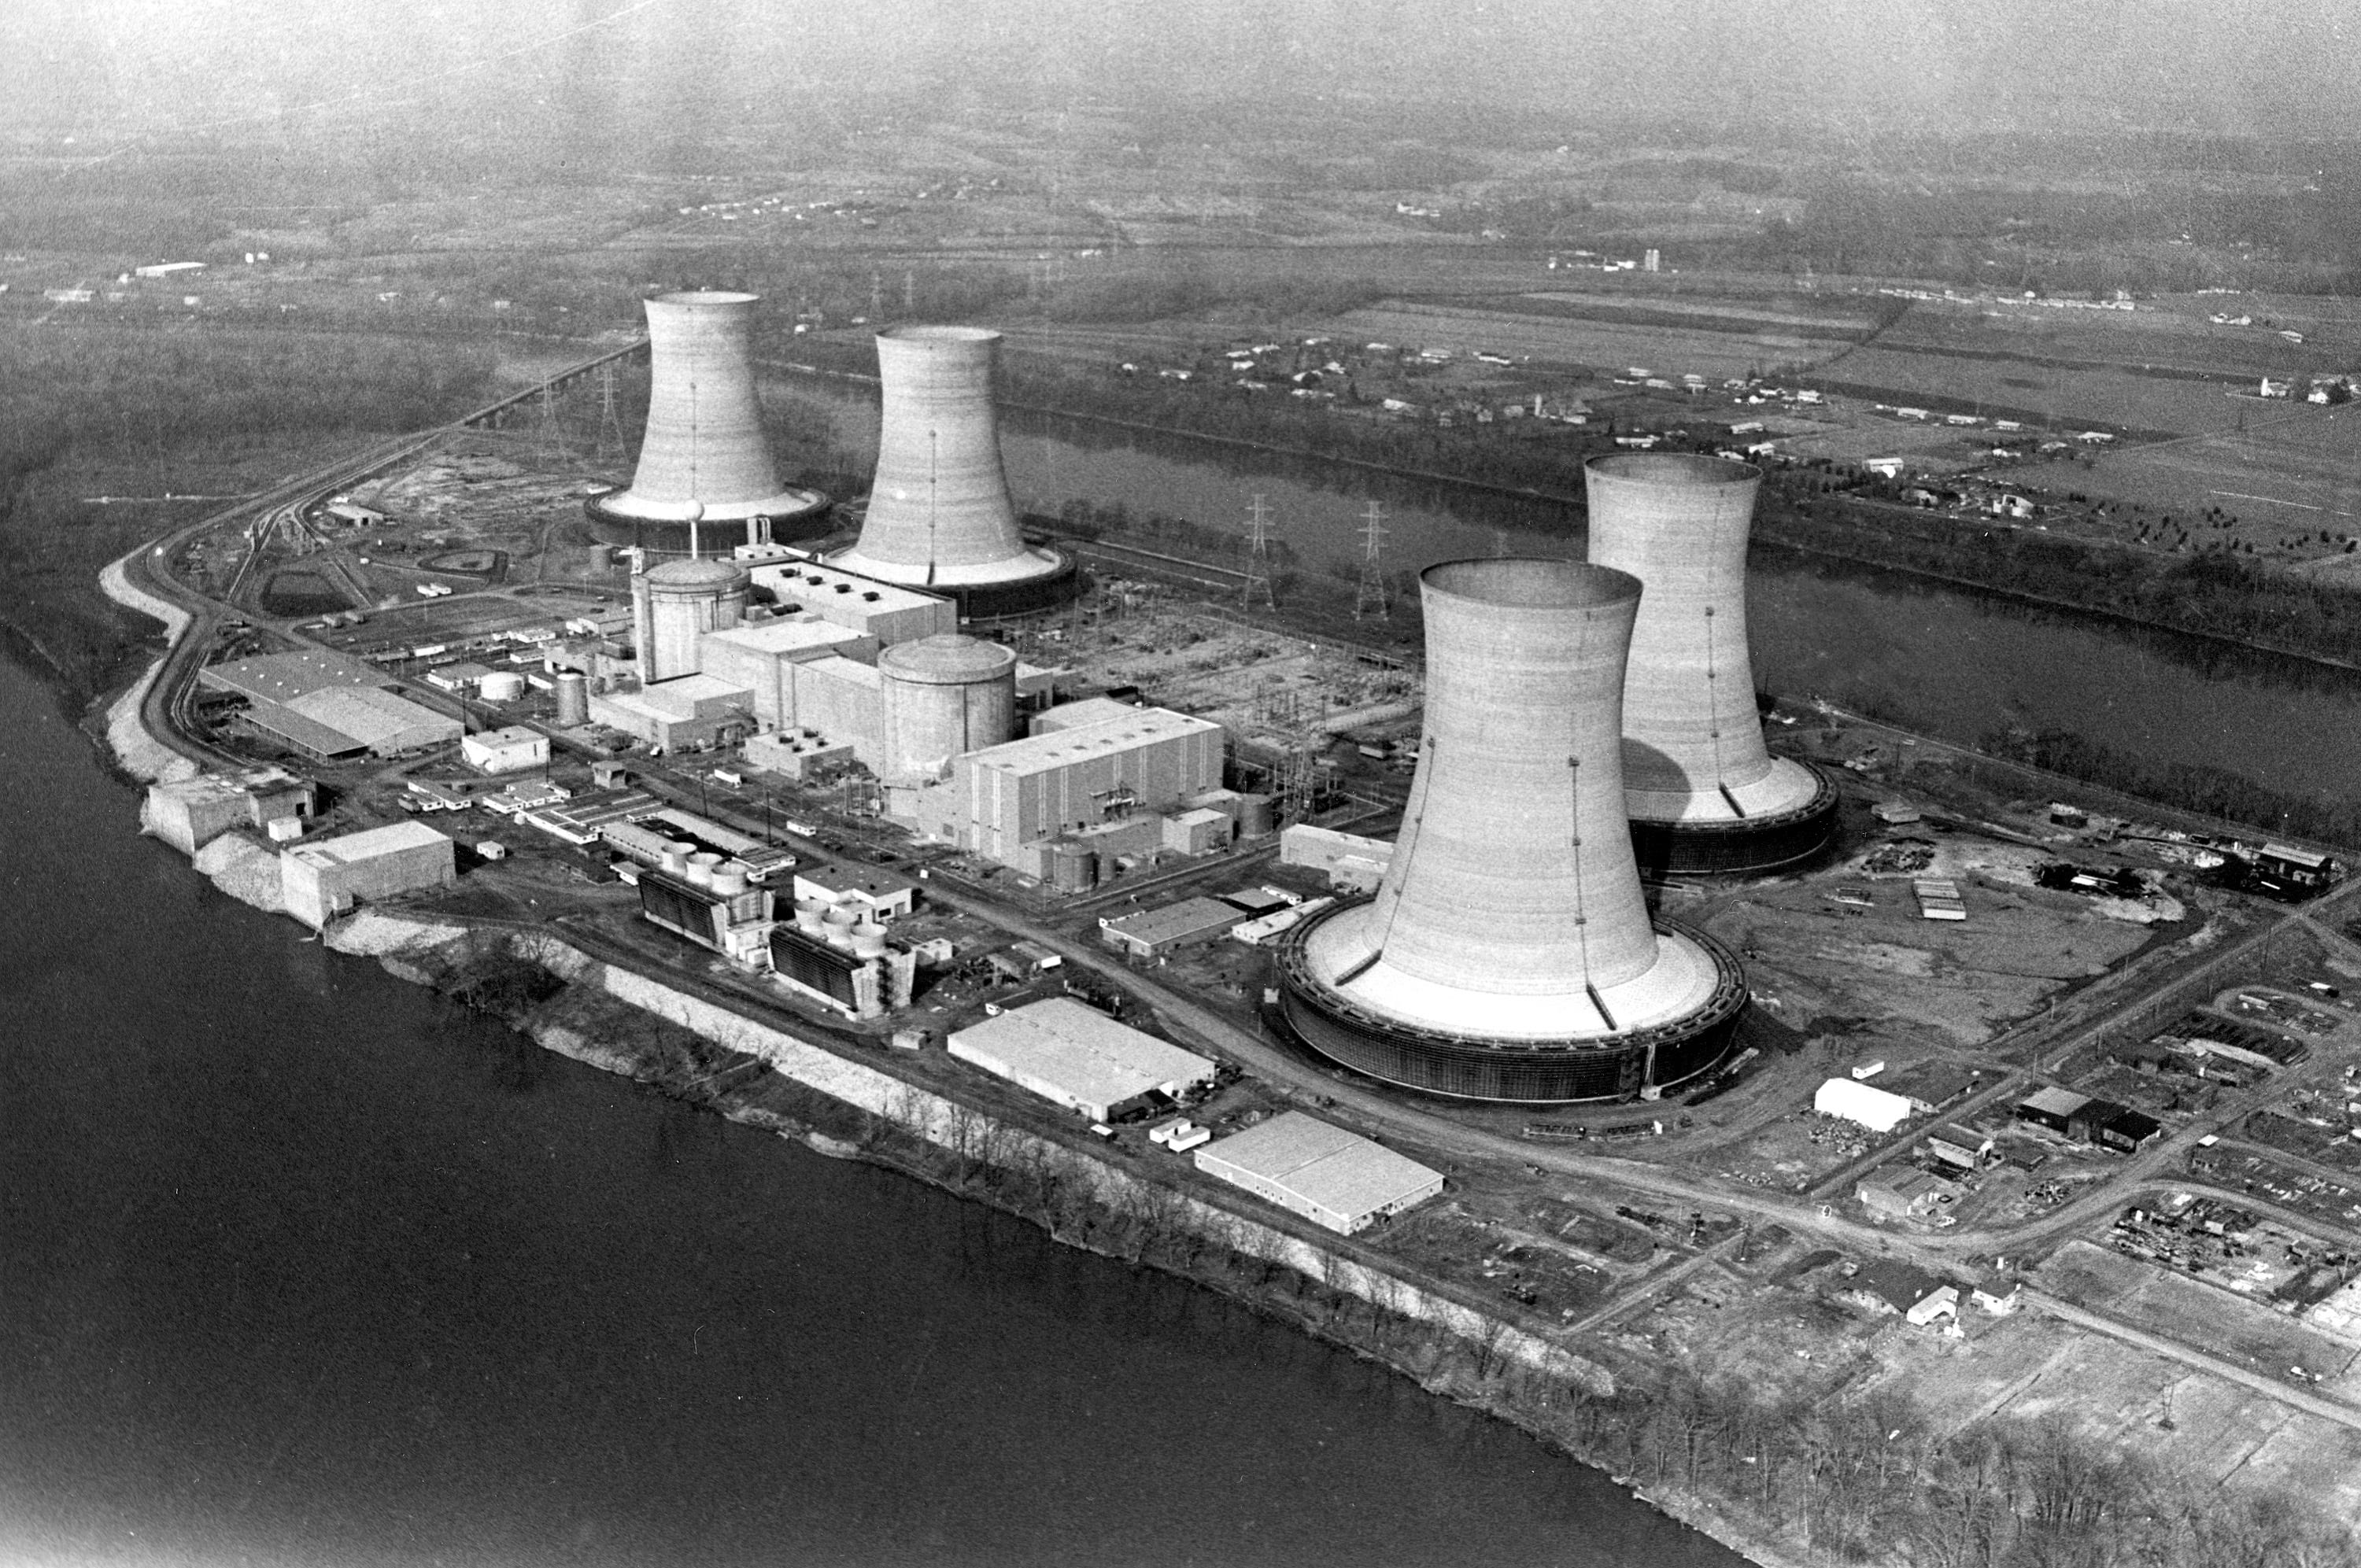 An air view shows the Three Mile Island nuclear power plant near Harrisburg, Pa., March 30, 1979.  The small dome at center is where the now-called "incident" occured Wednesday.  (AP Photo/Barry Thumma)